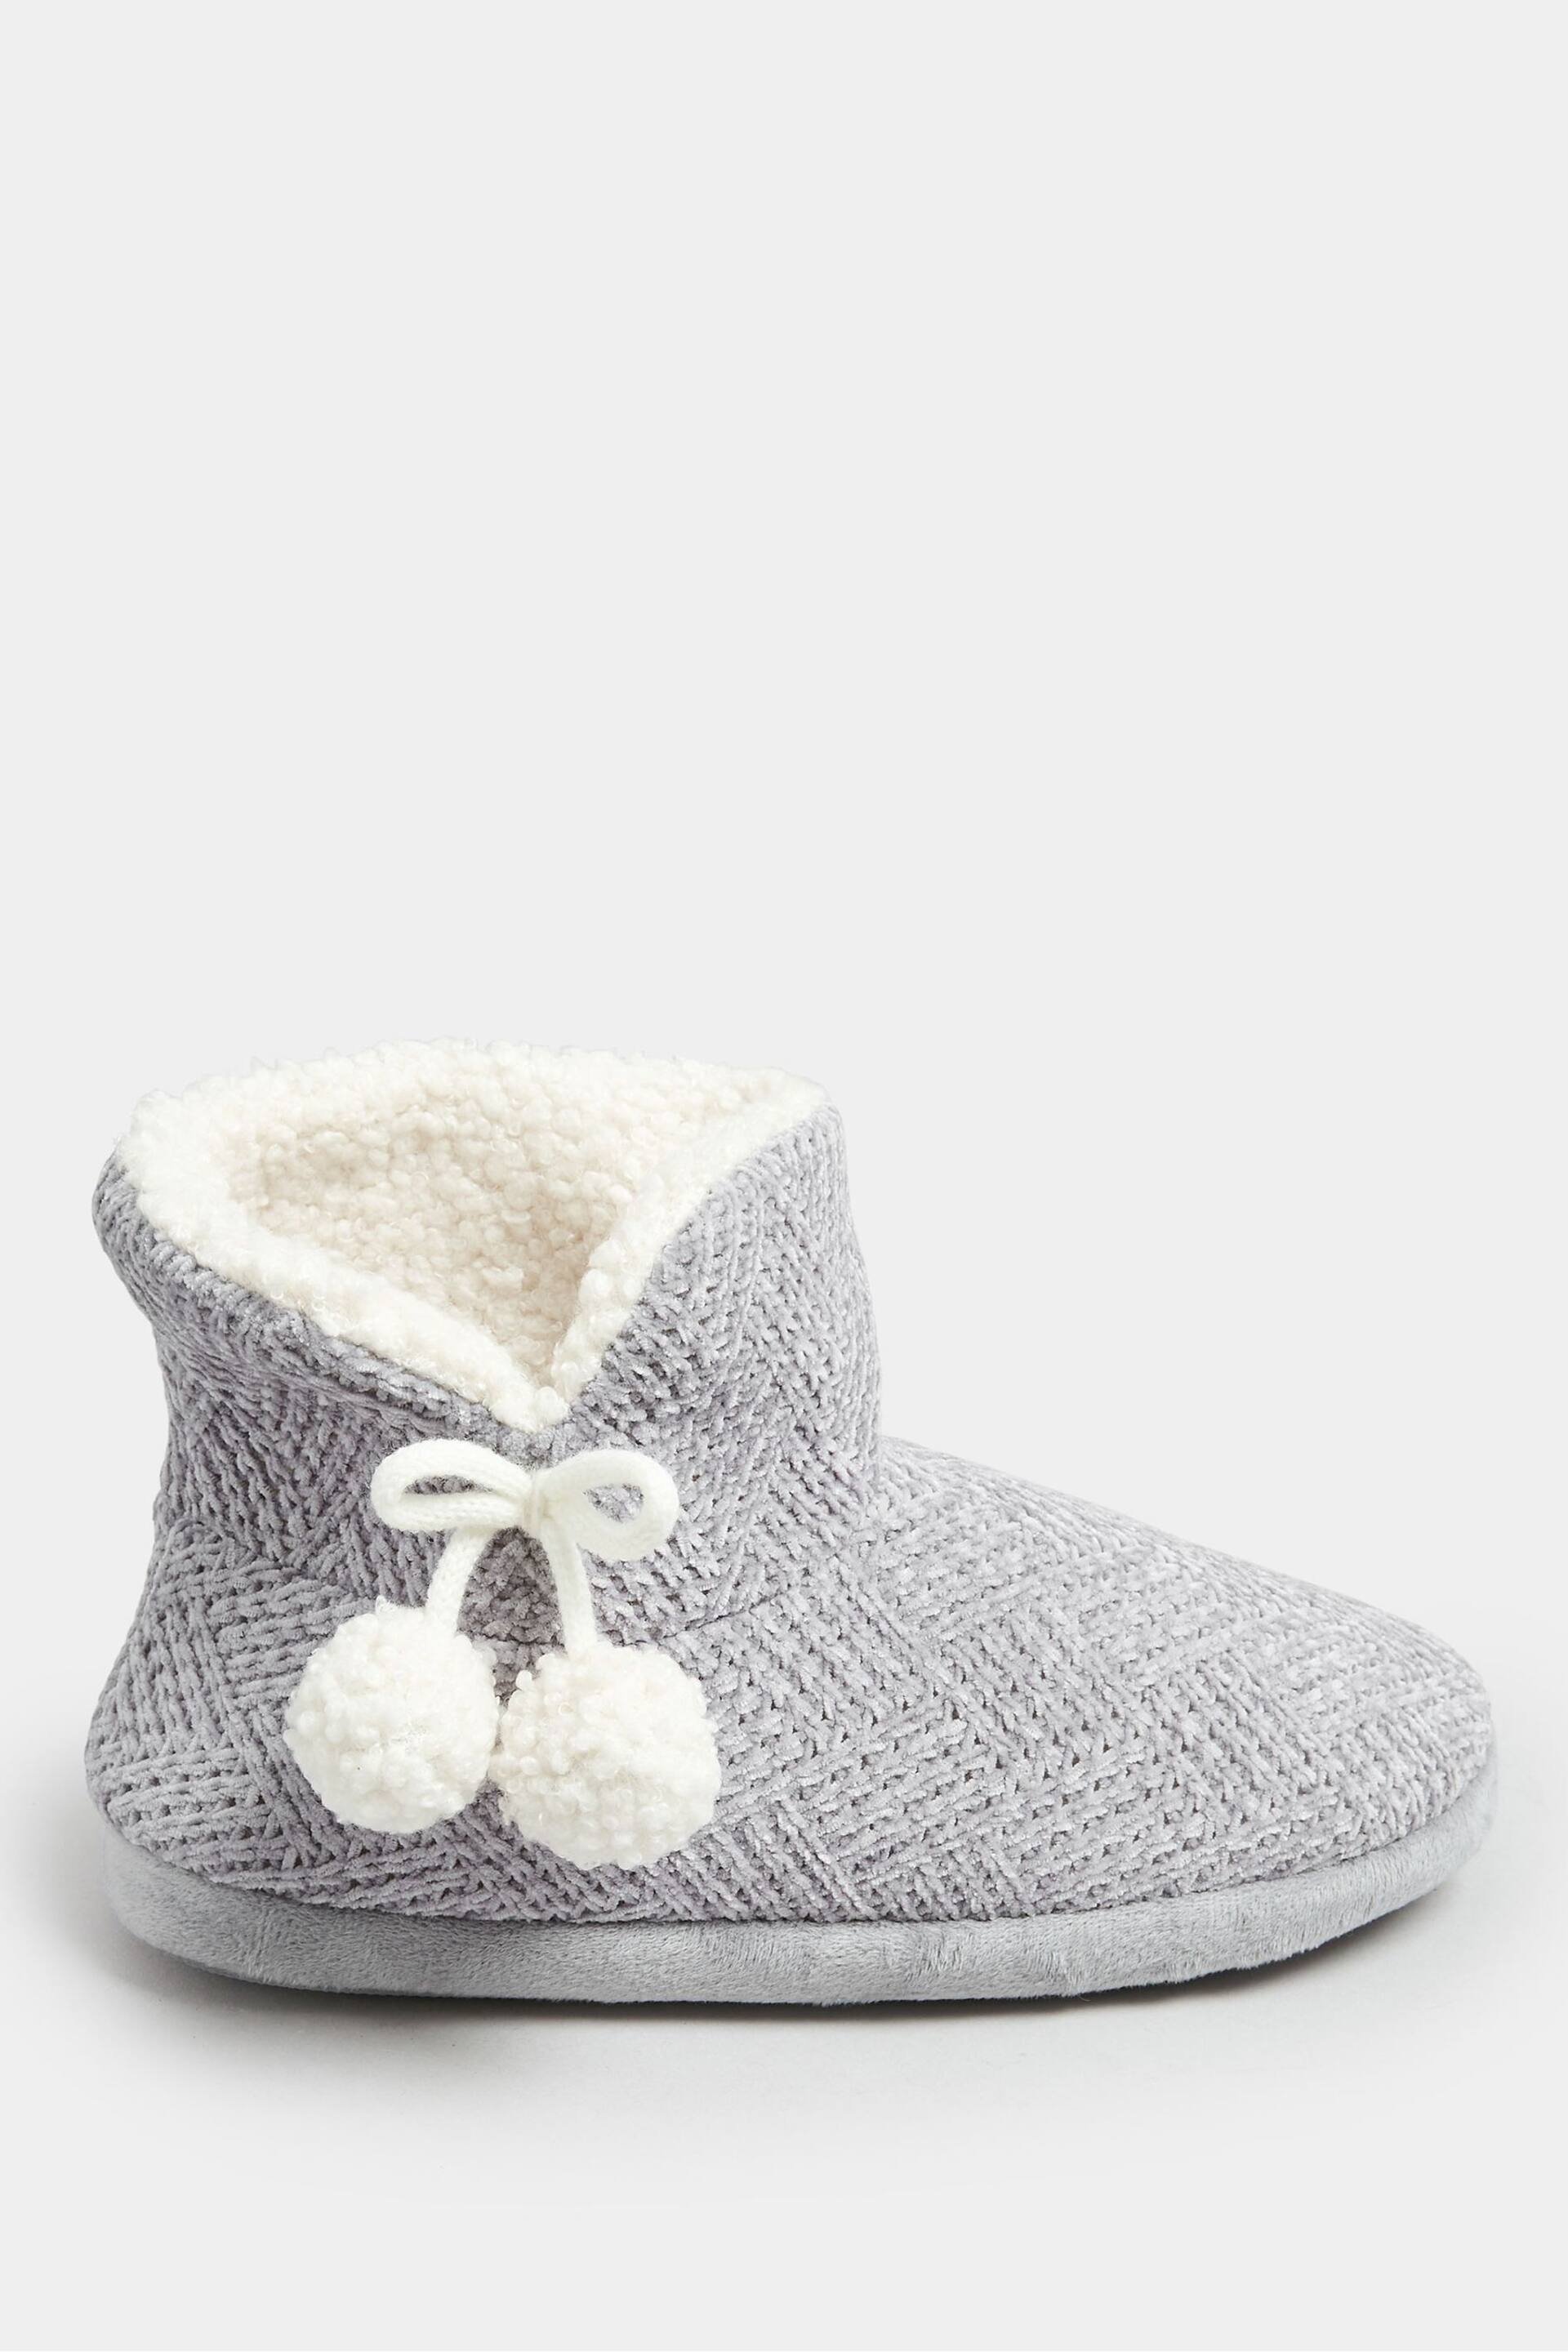 Yours Curve Grey Wide Fit Fluffy Chevron Boots Slippers - Image 1 of 5